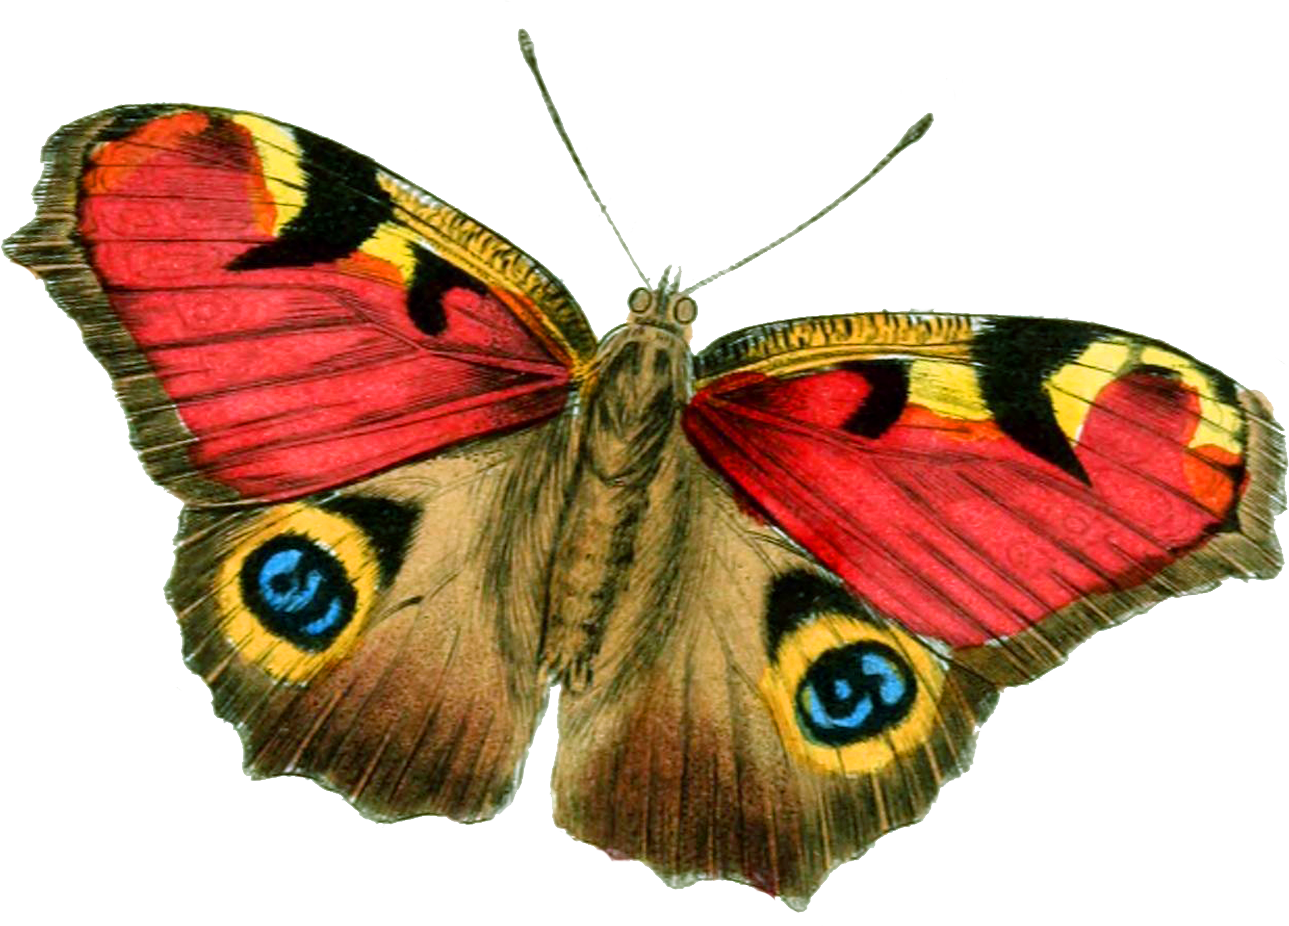 oranges clipart butterfly